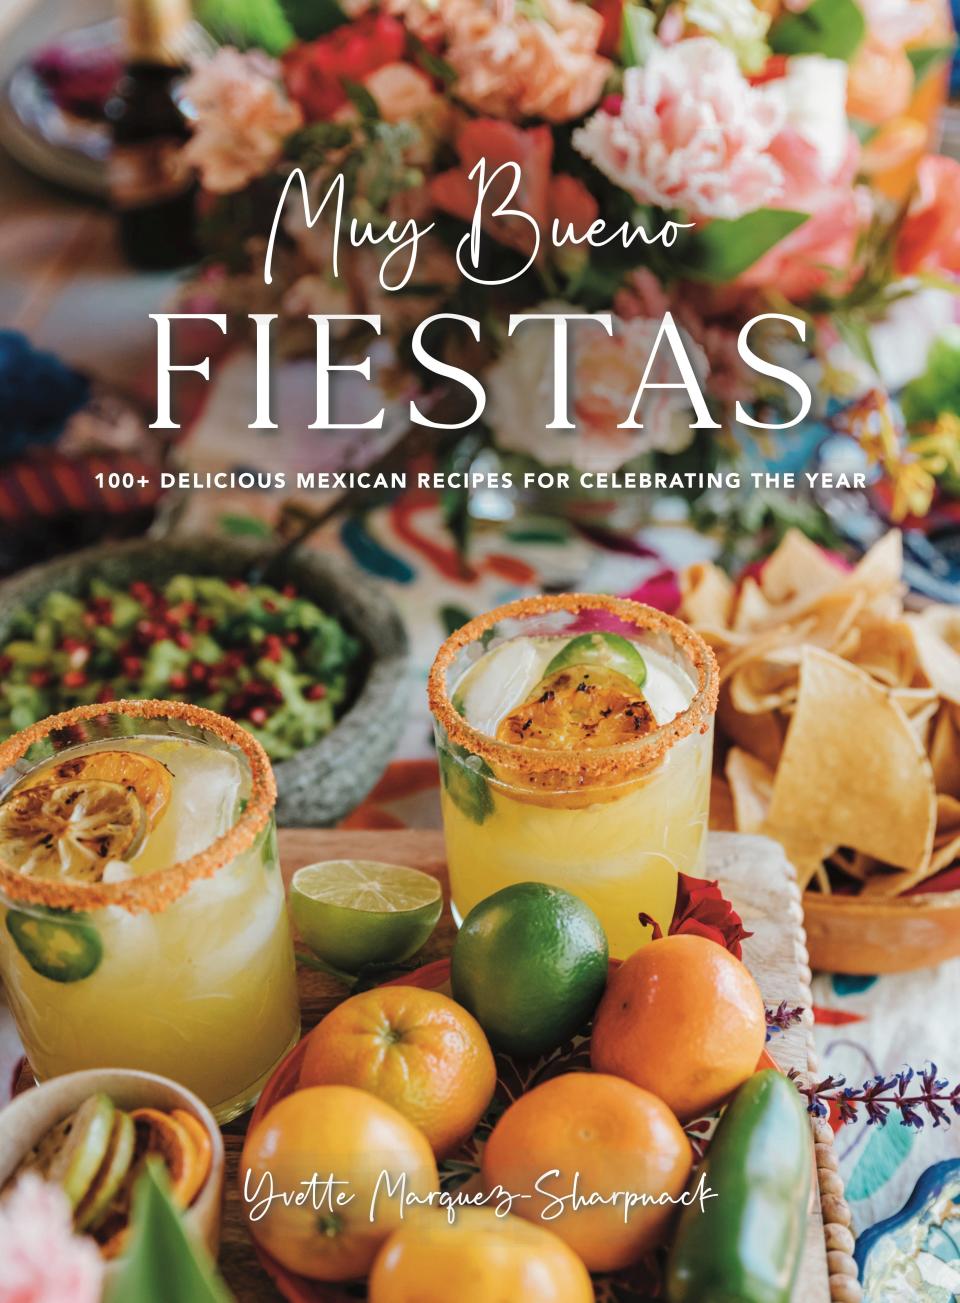 Yvette Marquez-Sharpnack's new cookbook, "Muy Bueno Fiestas," has recipes for the holidays.